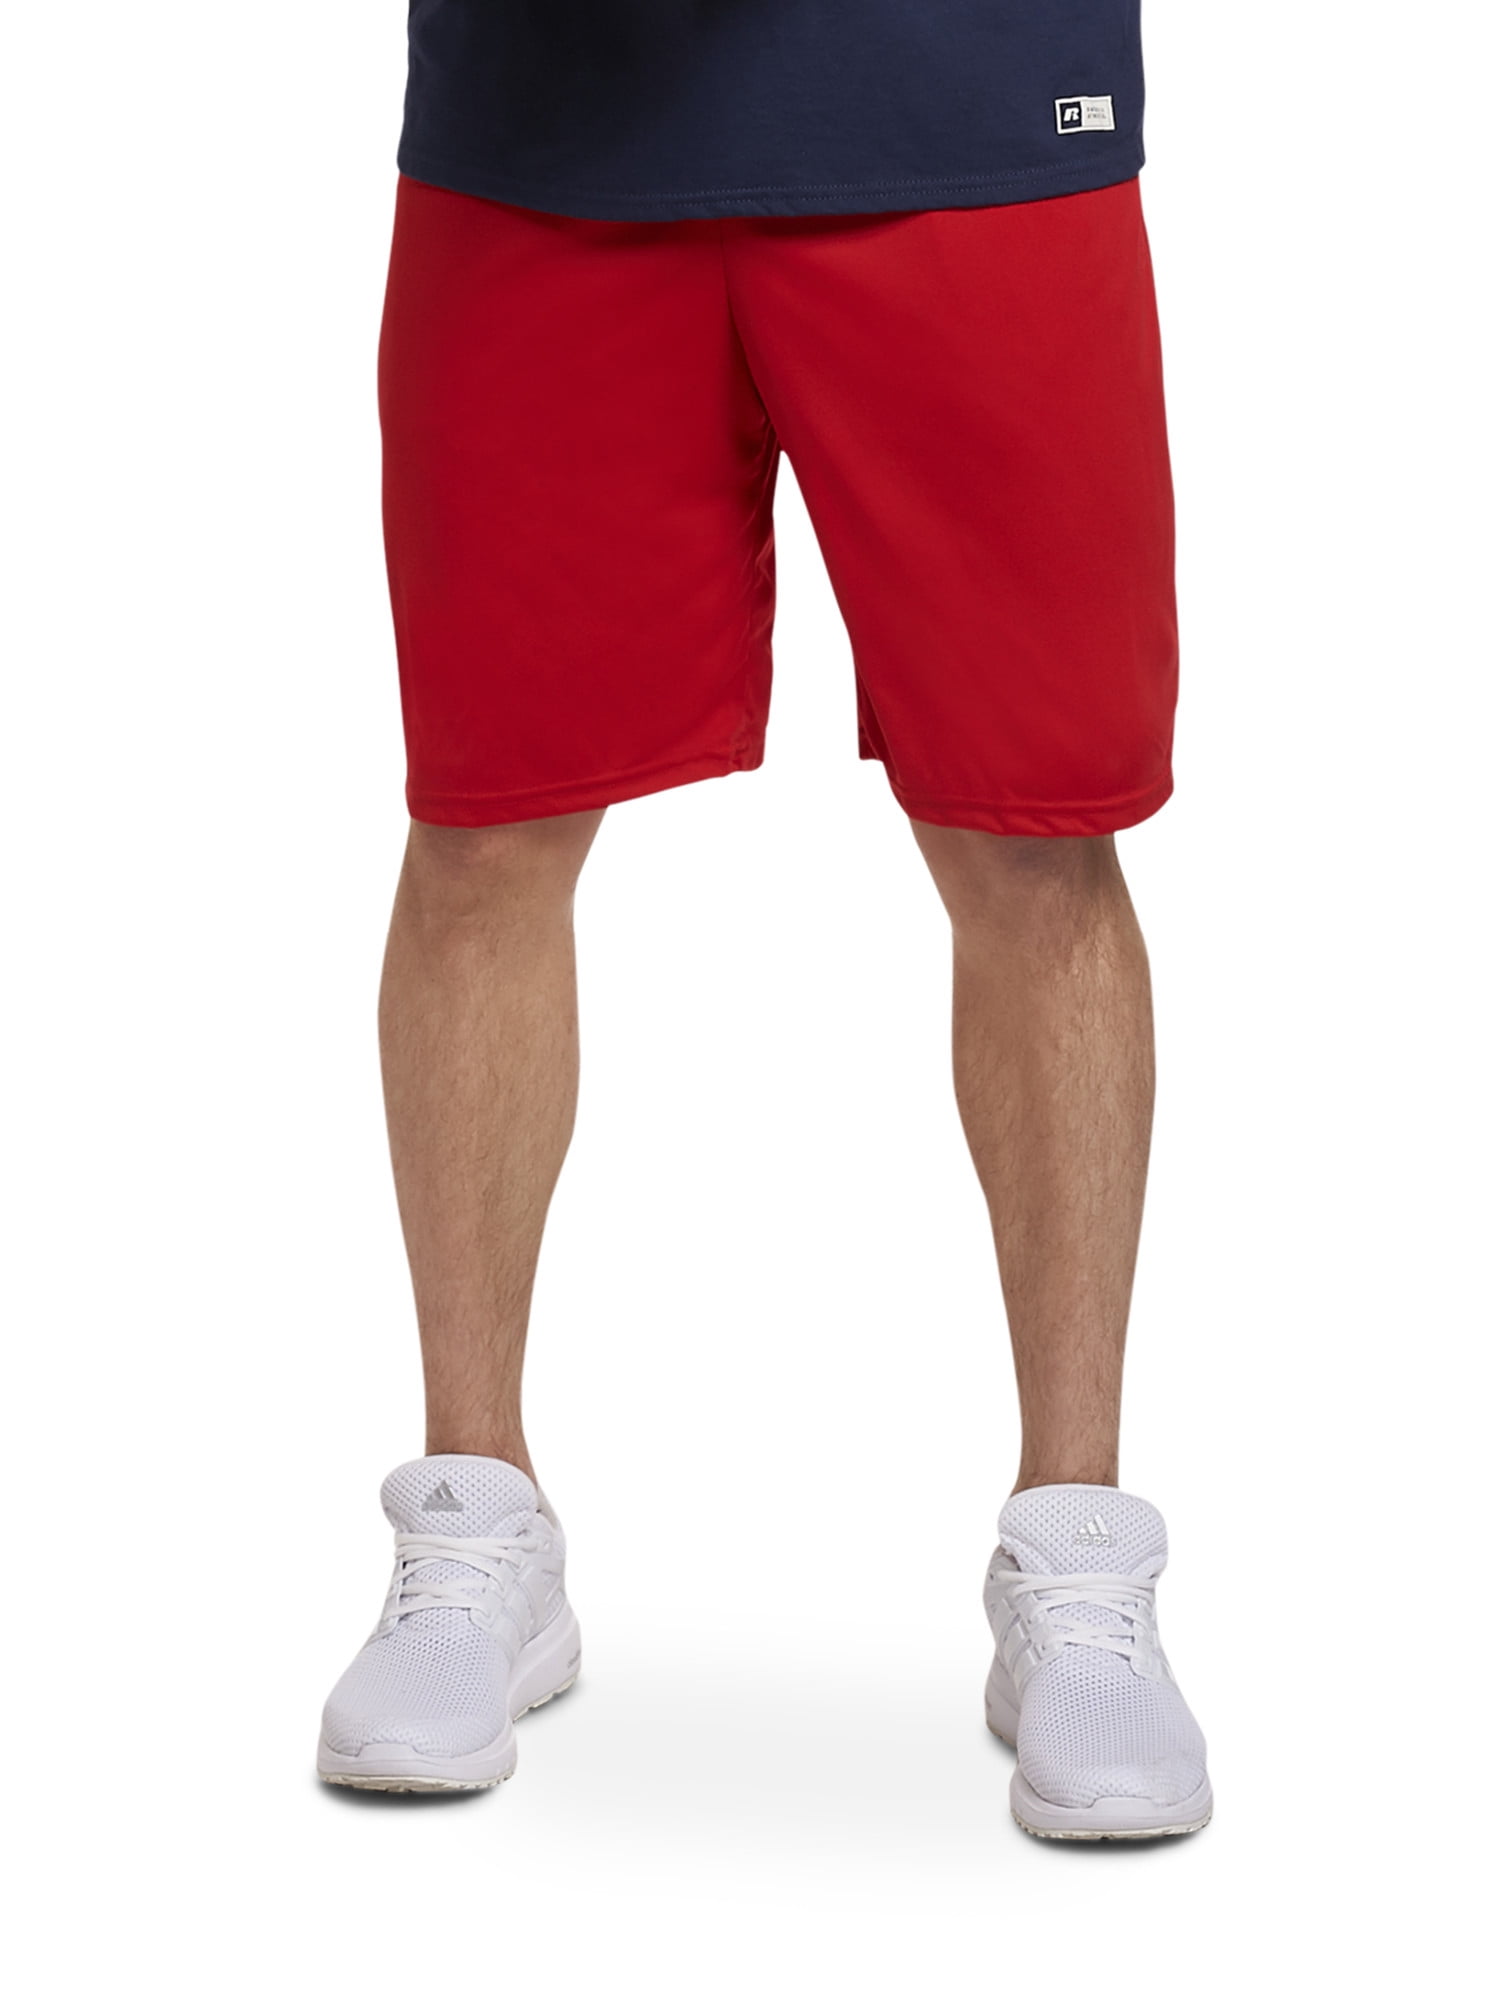 Men's S-XL 2XL 3XL Cotton Gym Shorts 10" Inseam with Pockets Russell Athletic 